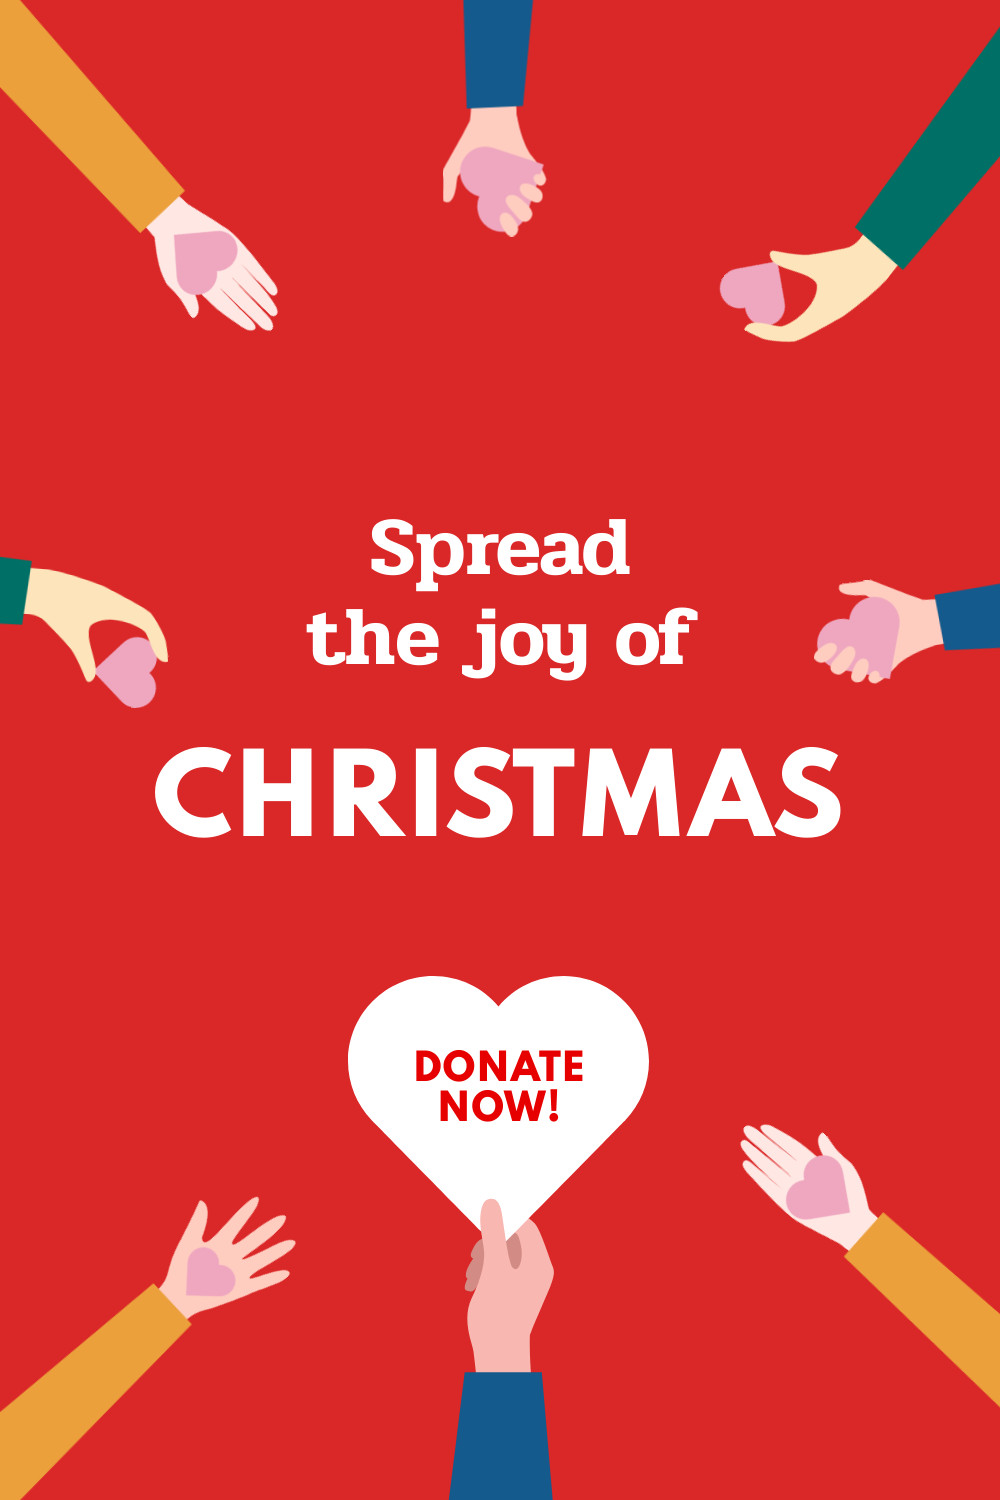 Donate and Spread the Joy of Christmas